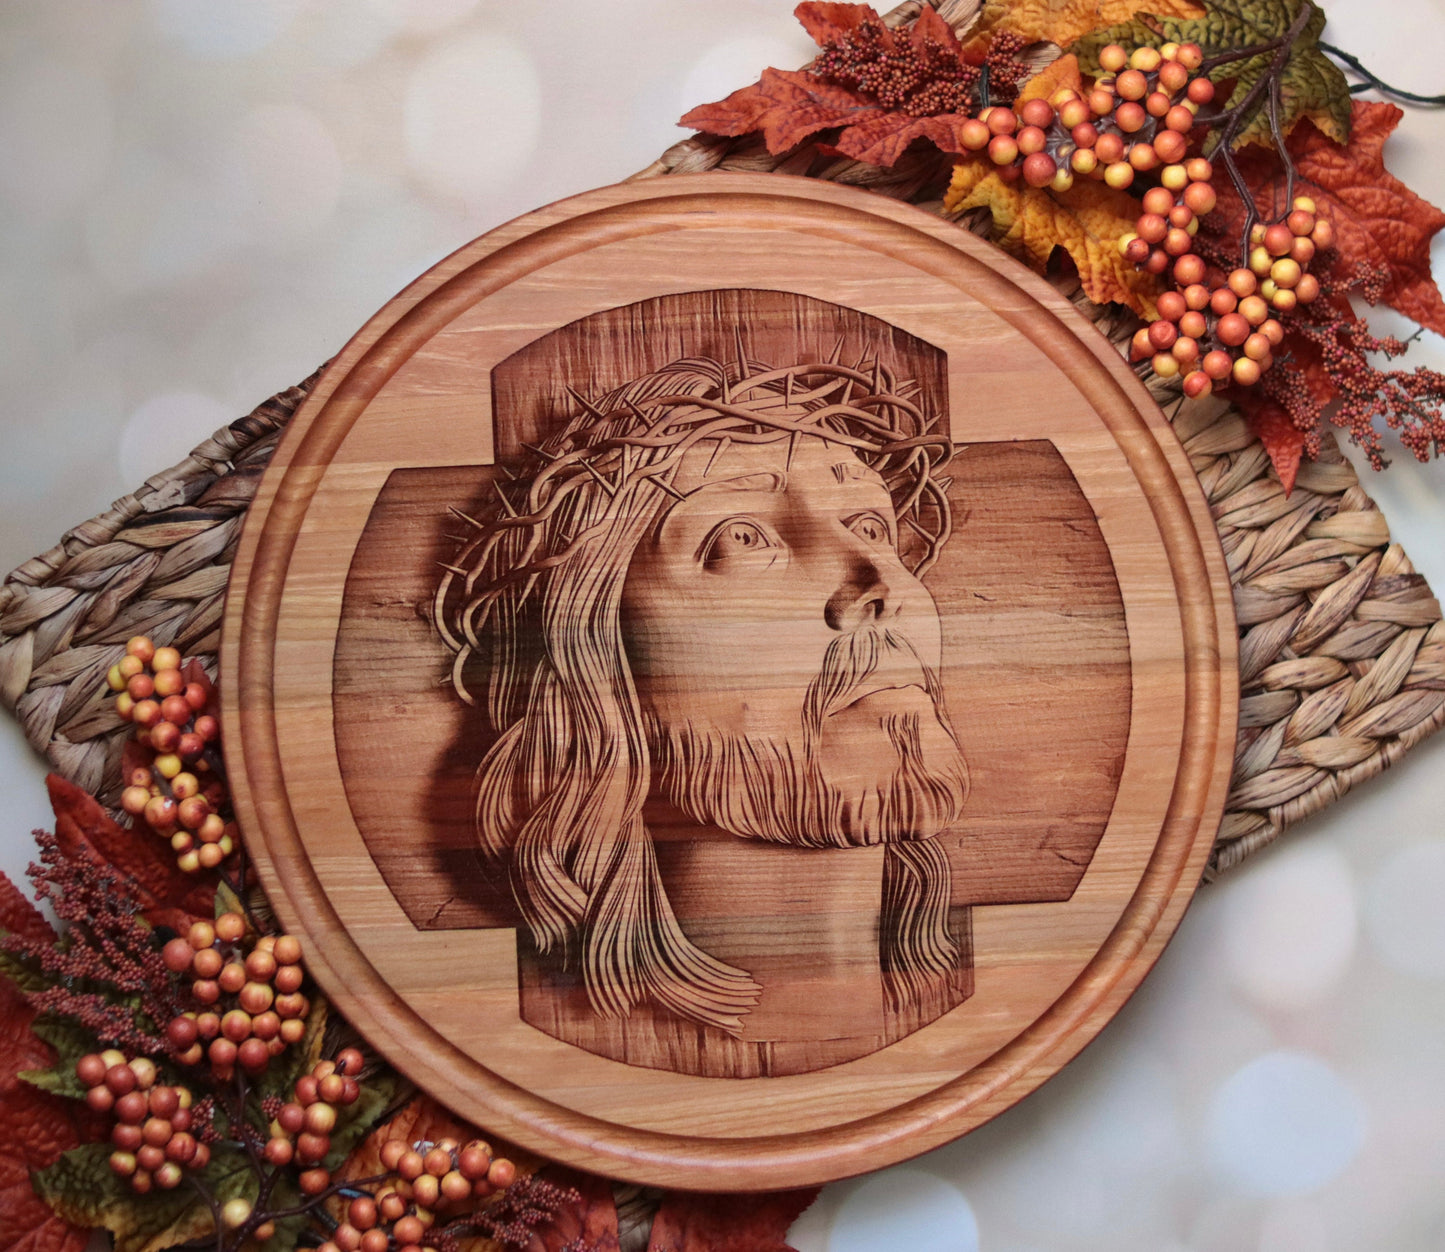 Jesus Crown of Thorns 3D Illusion Cutting Board, Religious kitchen decor, Christian Wedding Gift,  Jesus Christmas Serving Plate